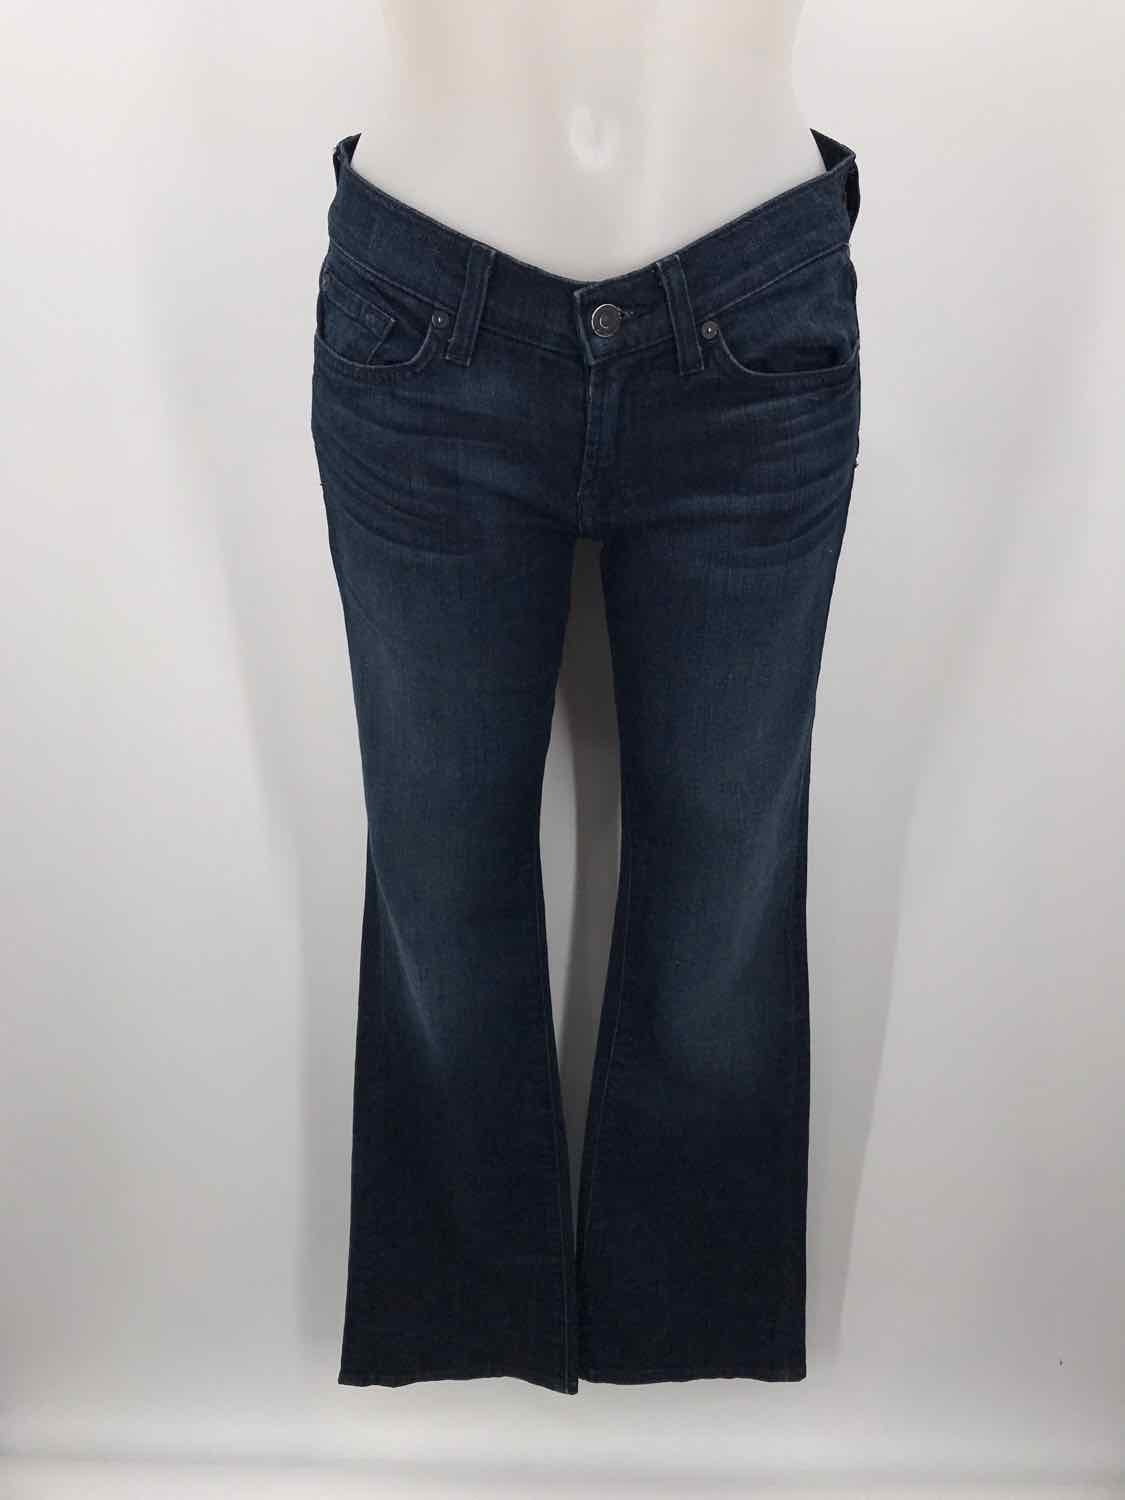 7 For All Mankind Navy Size 26 Boot Cut Jeans